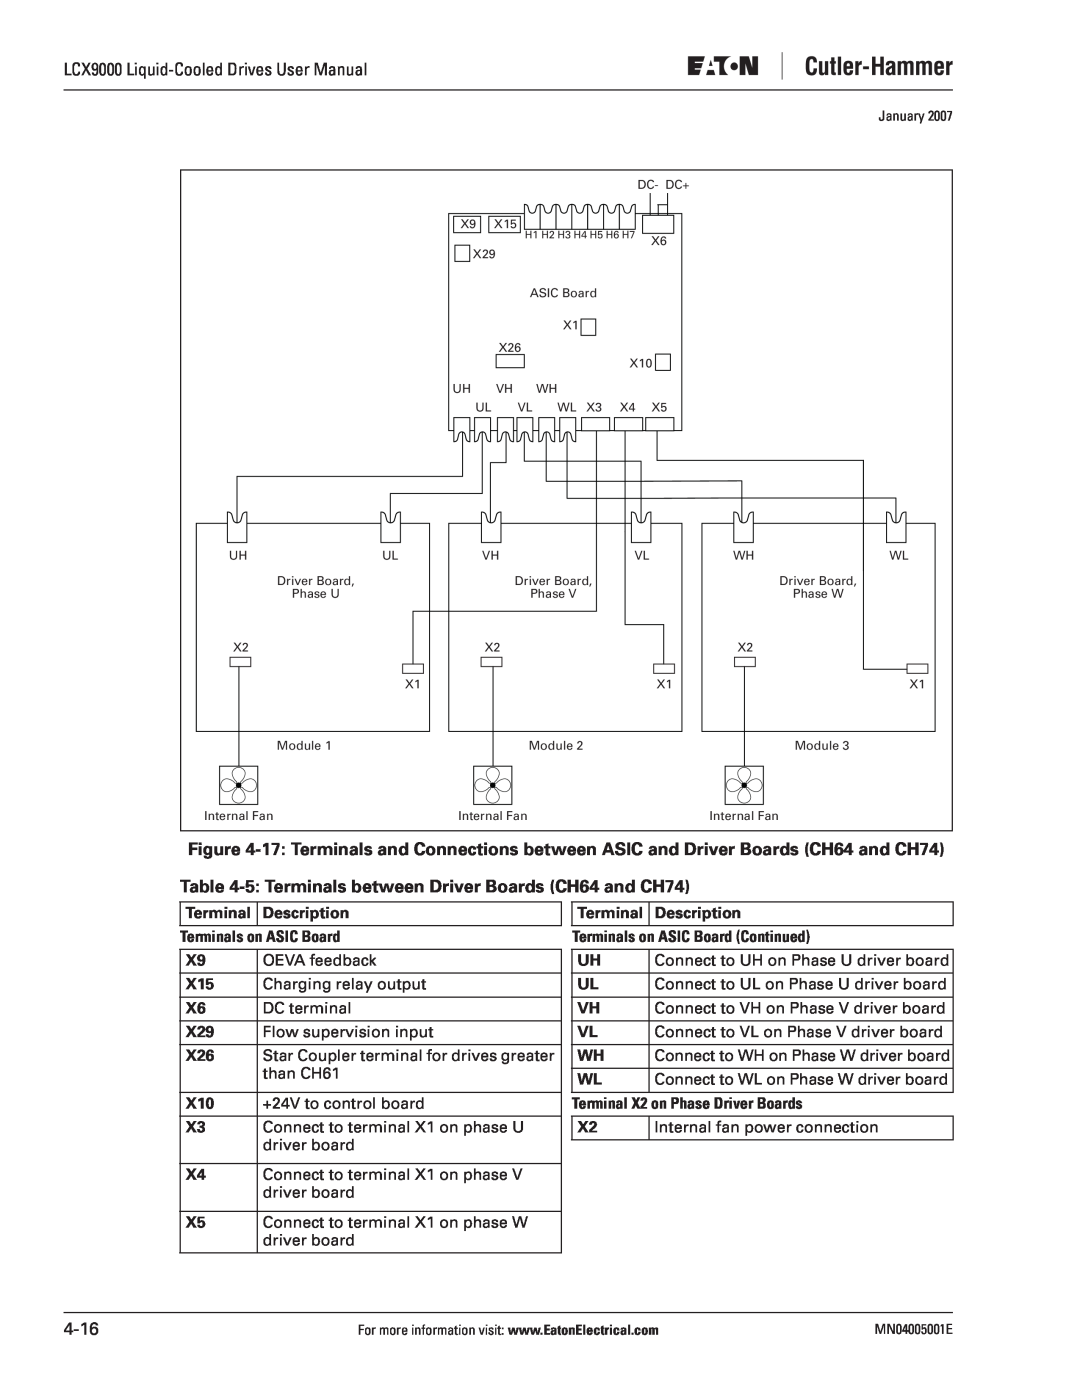 J. T. Eaton user manual 5 Terminals between Driver Boards CH64 and CH74, LCX9000 Liquid-Cooled Drives User Manual, 4-16 